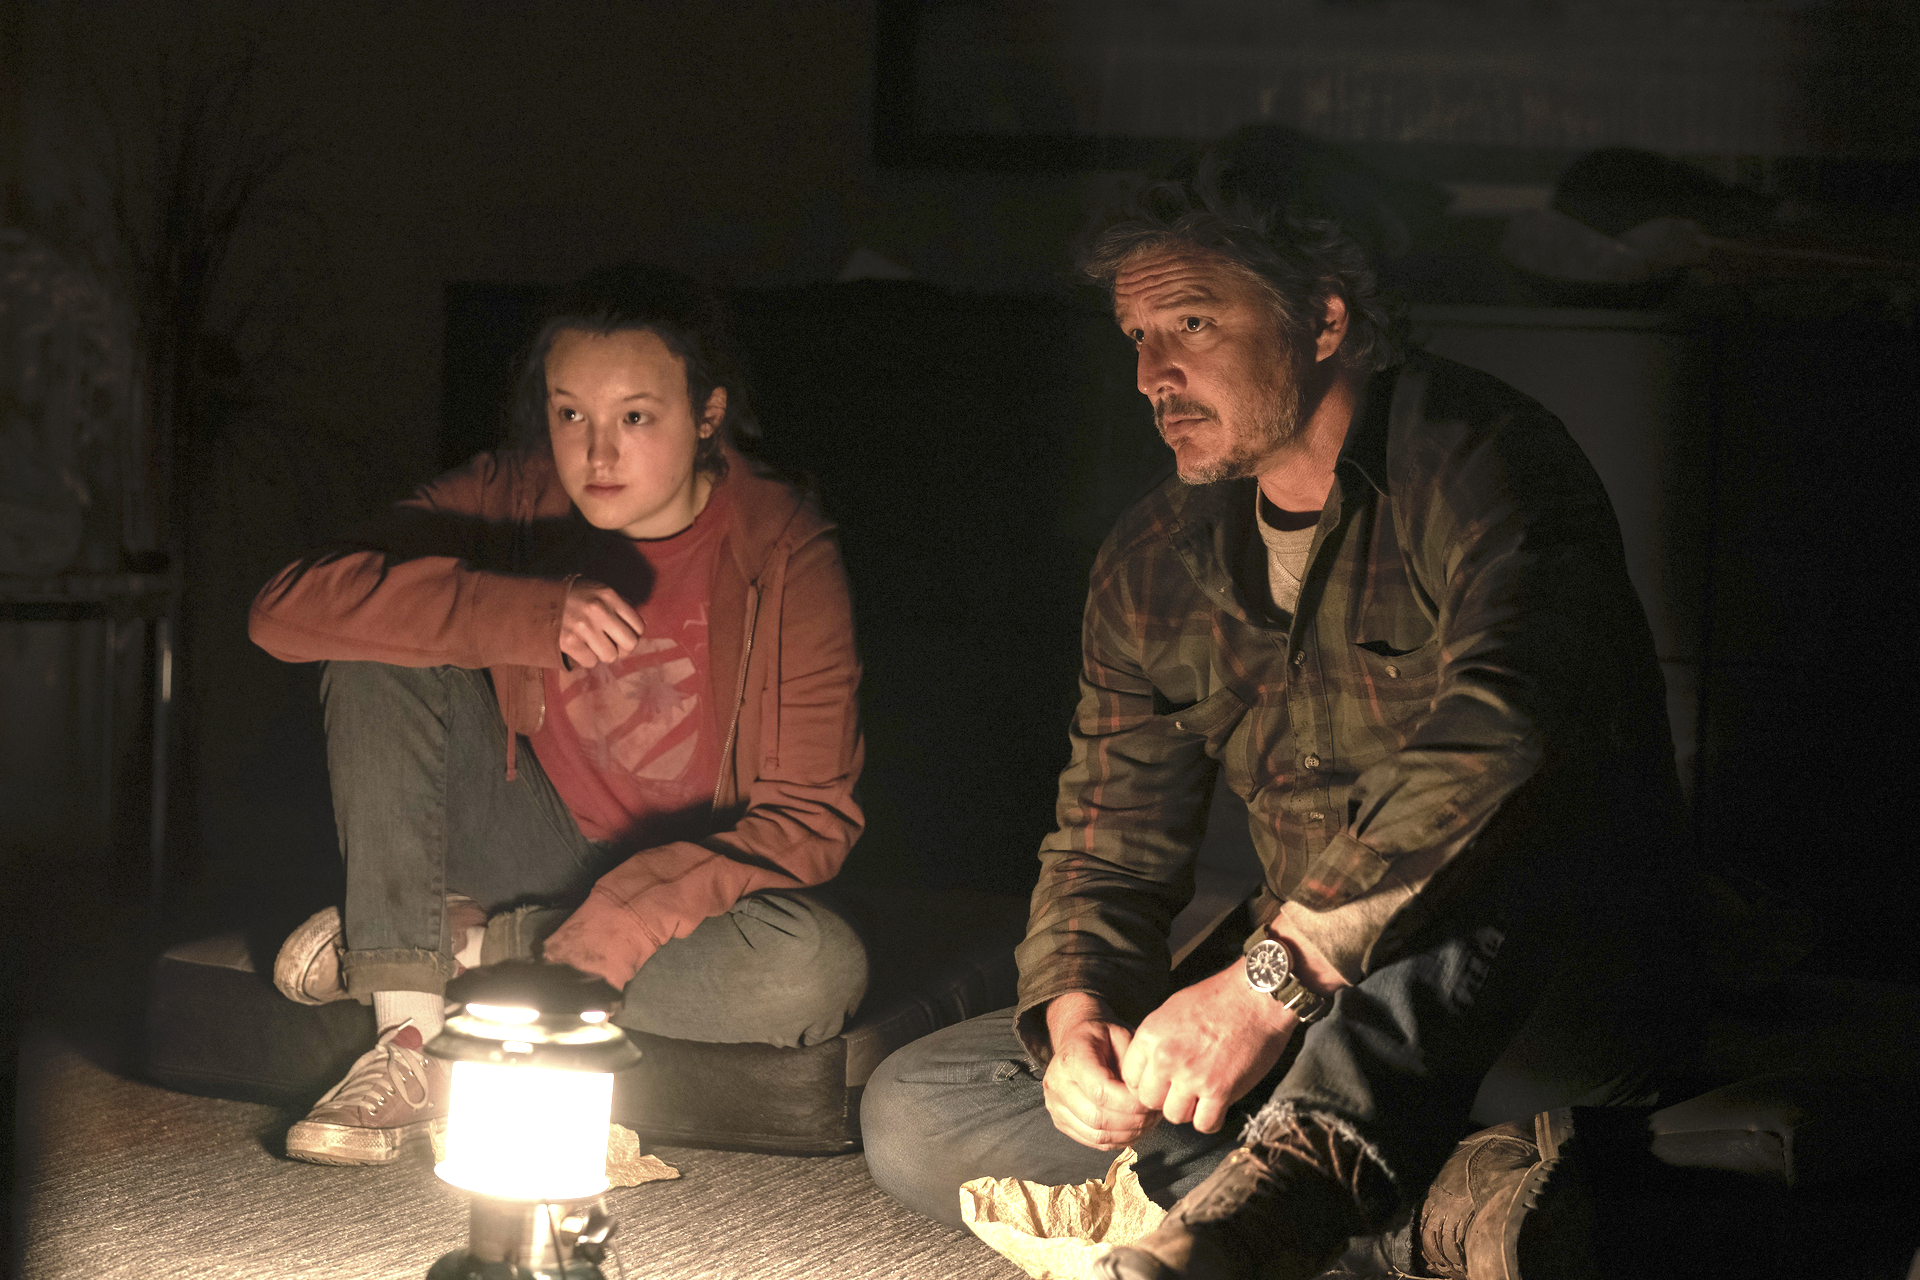 Ellie (Bella Ramsey) and Joel (Pedro Pascal) sit on the floor together, lit by a lantern in front of them in The Last of Us.